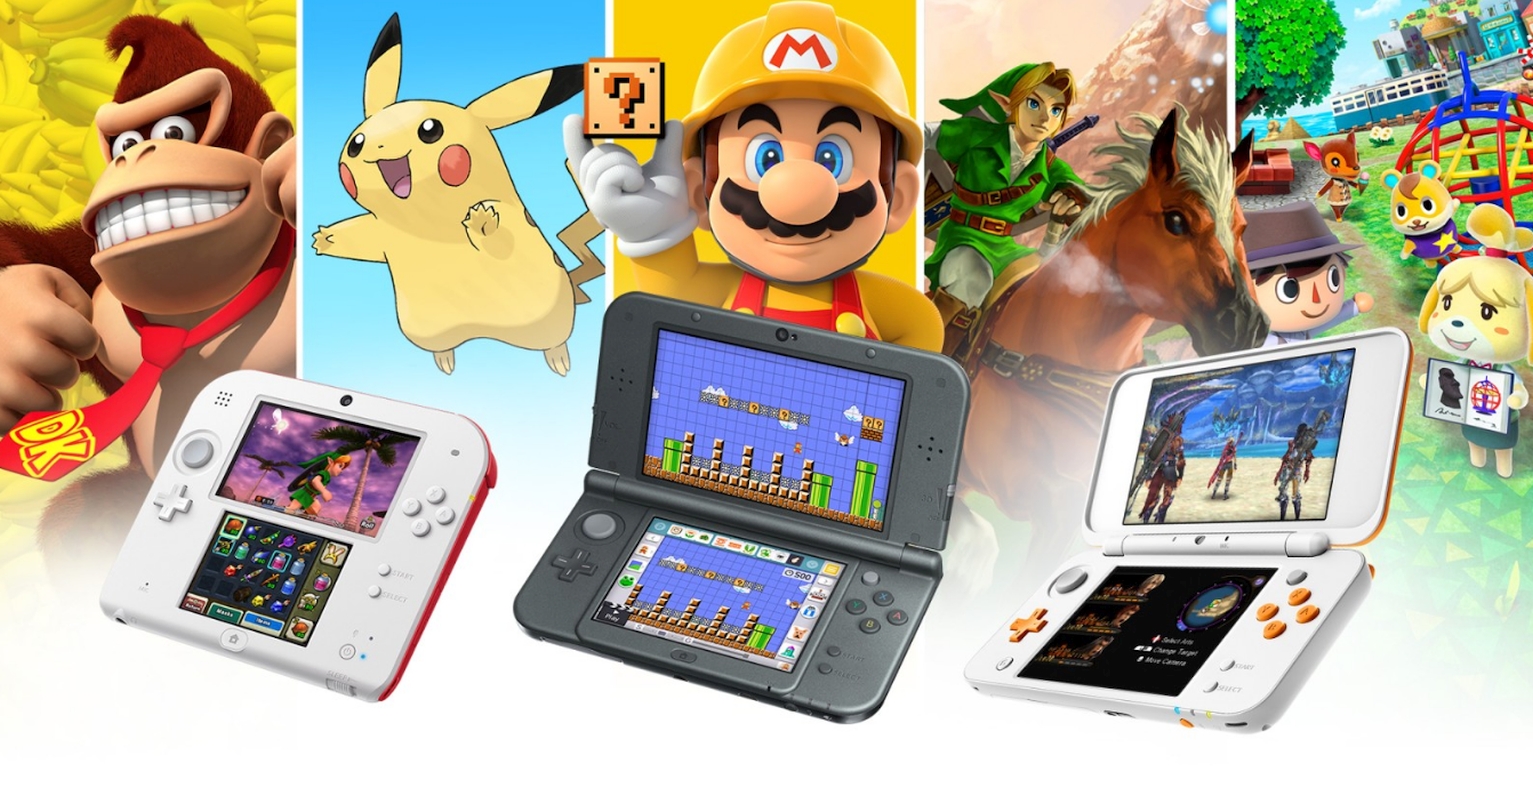 Nintendo 3DS eShop And Online Play Will Continue To Operate “For Foreseeable Future”